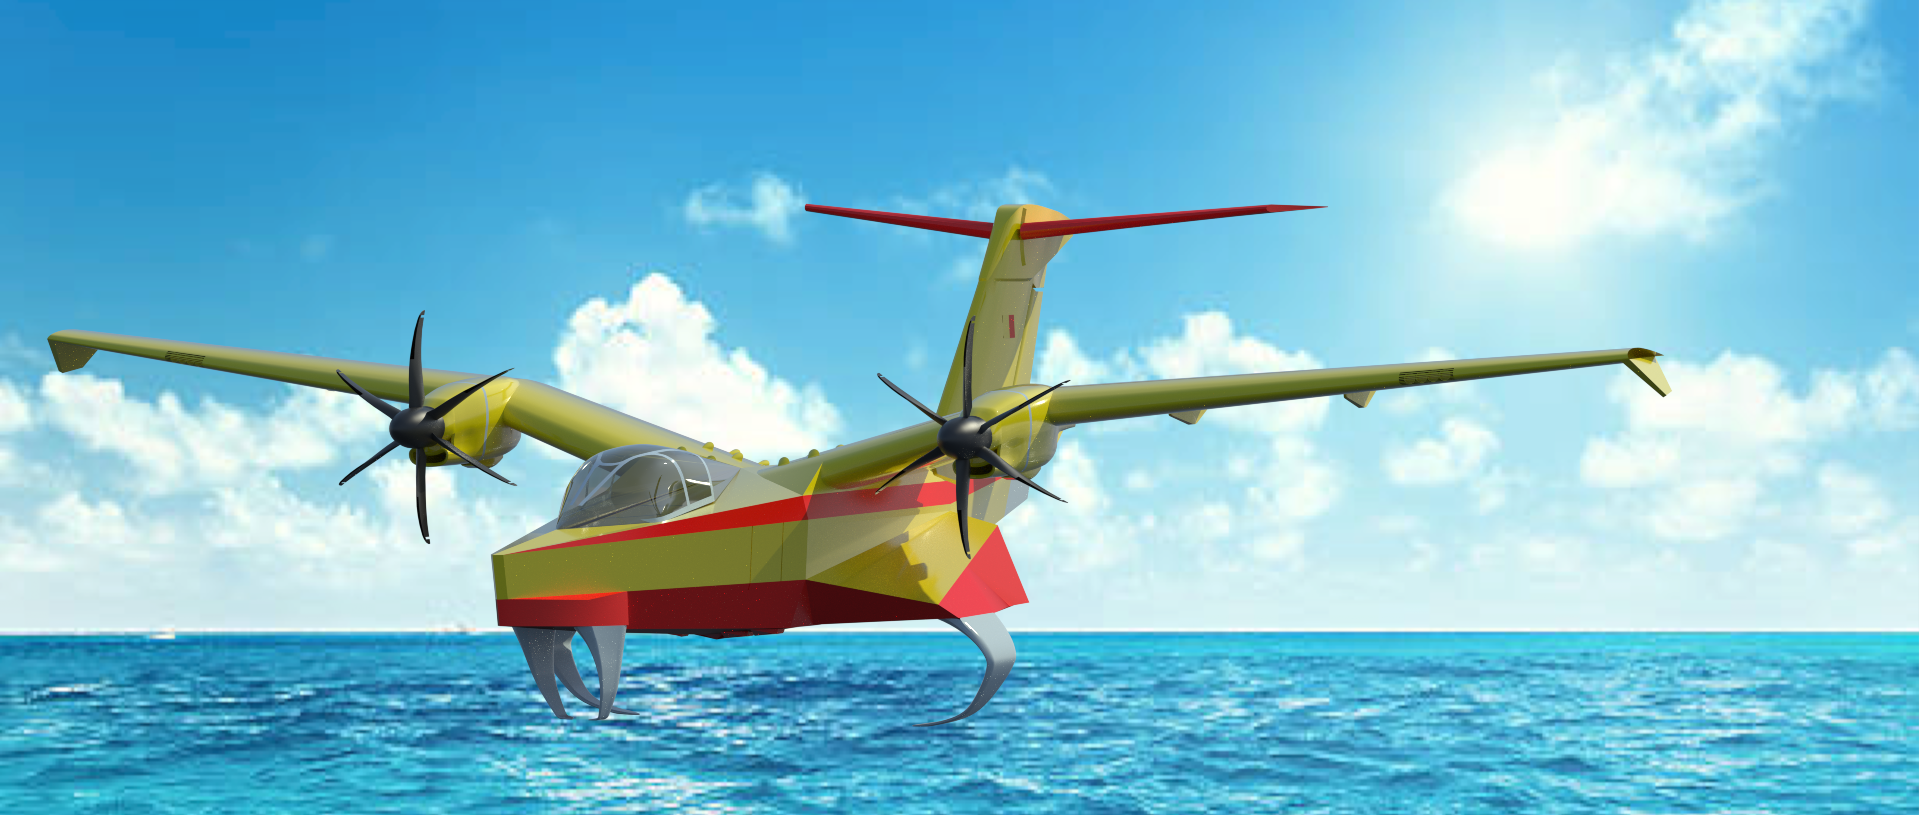 Visual of Roadfour's Seagle firefighting aircraft